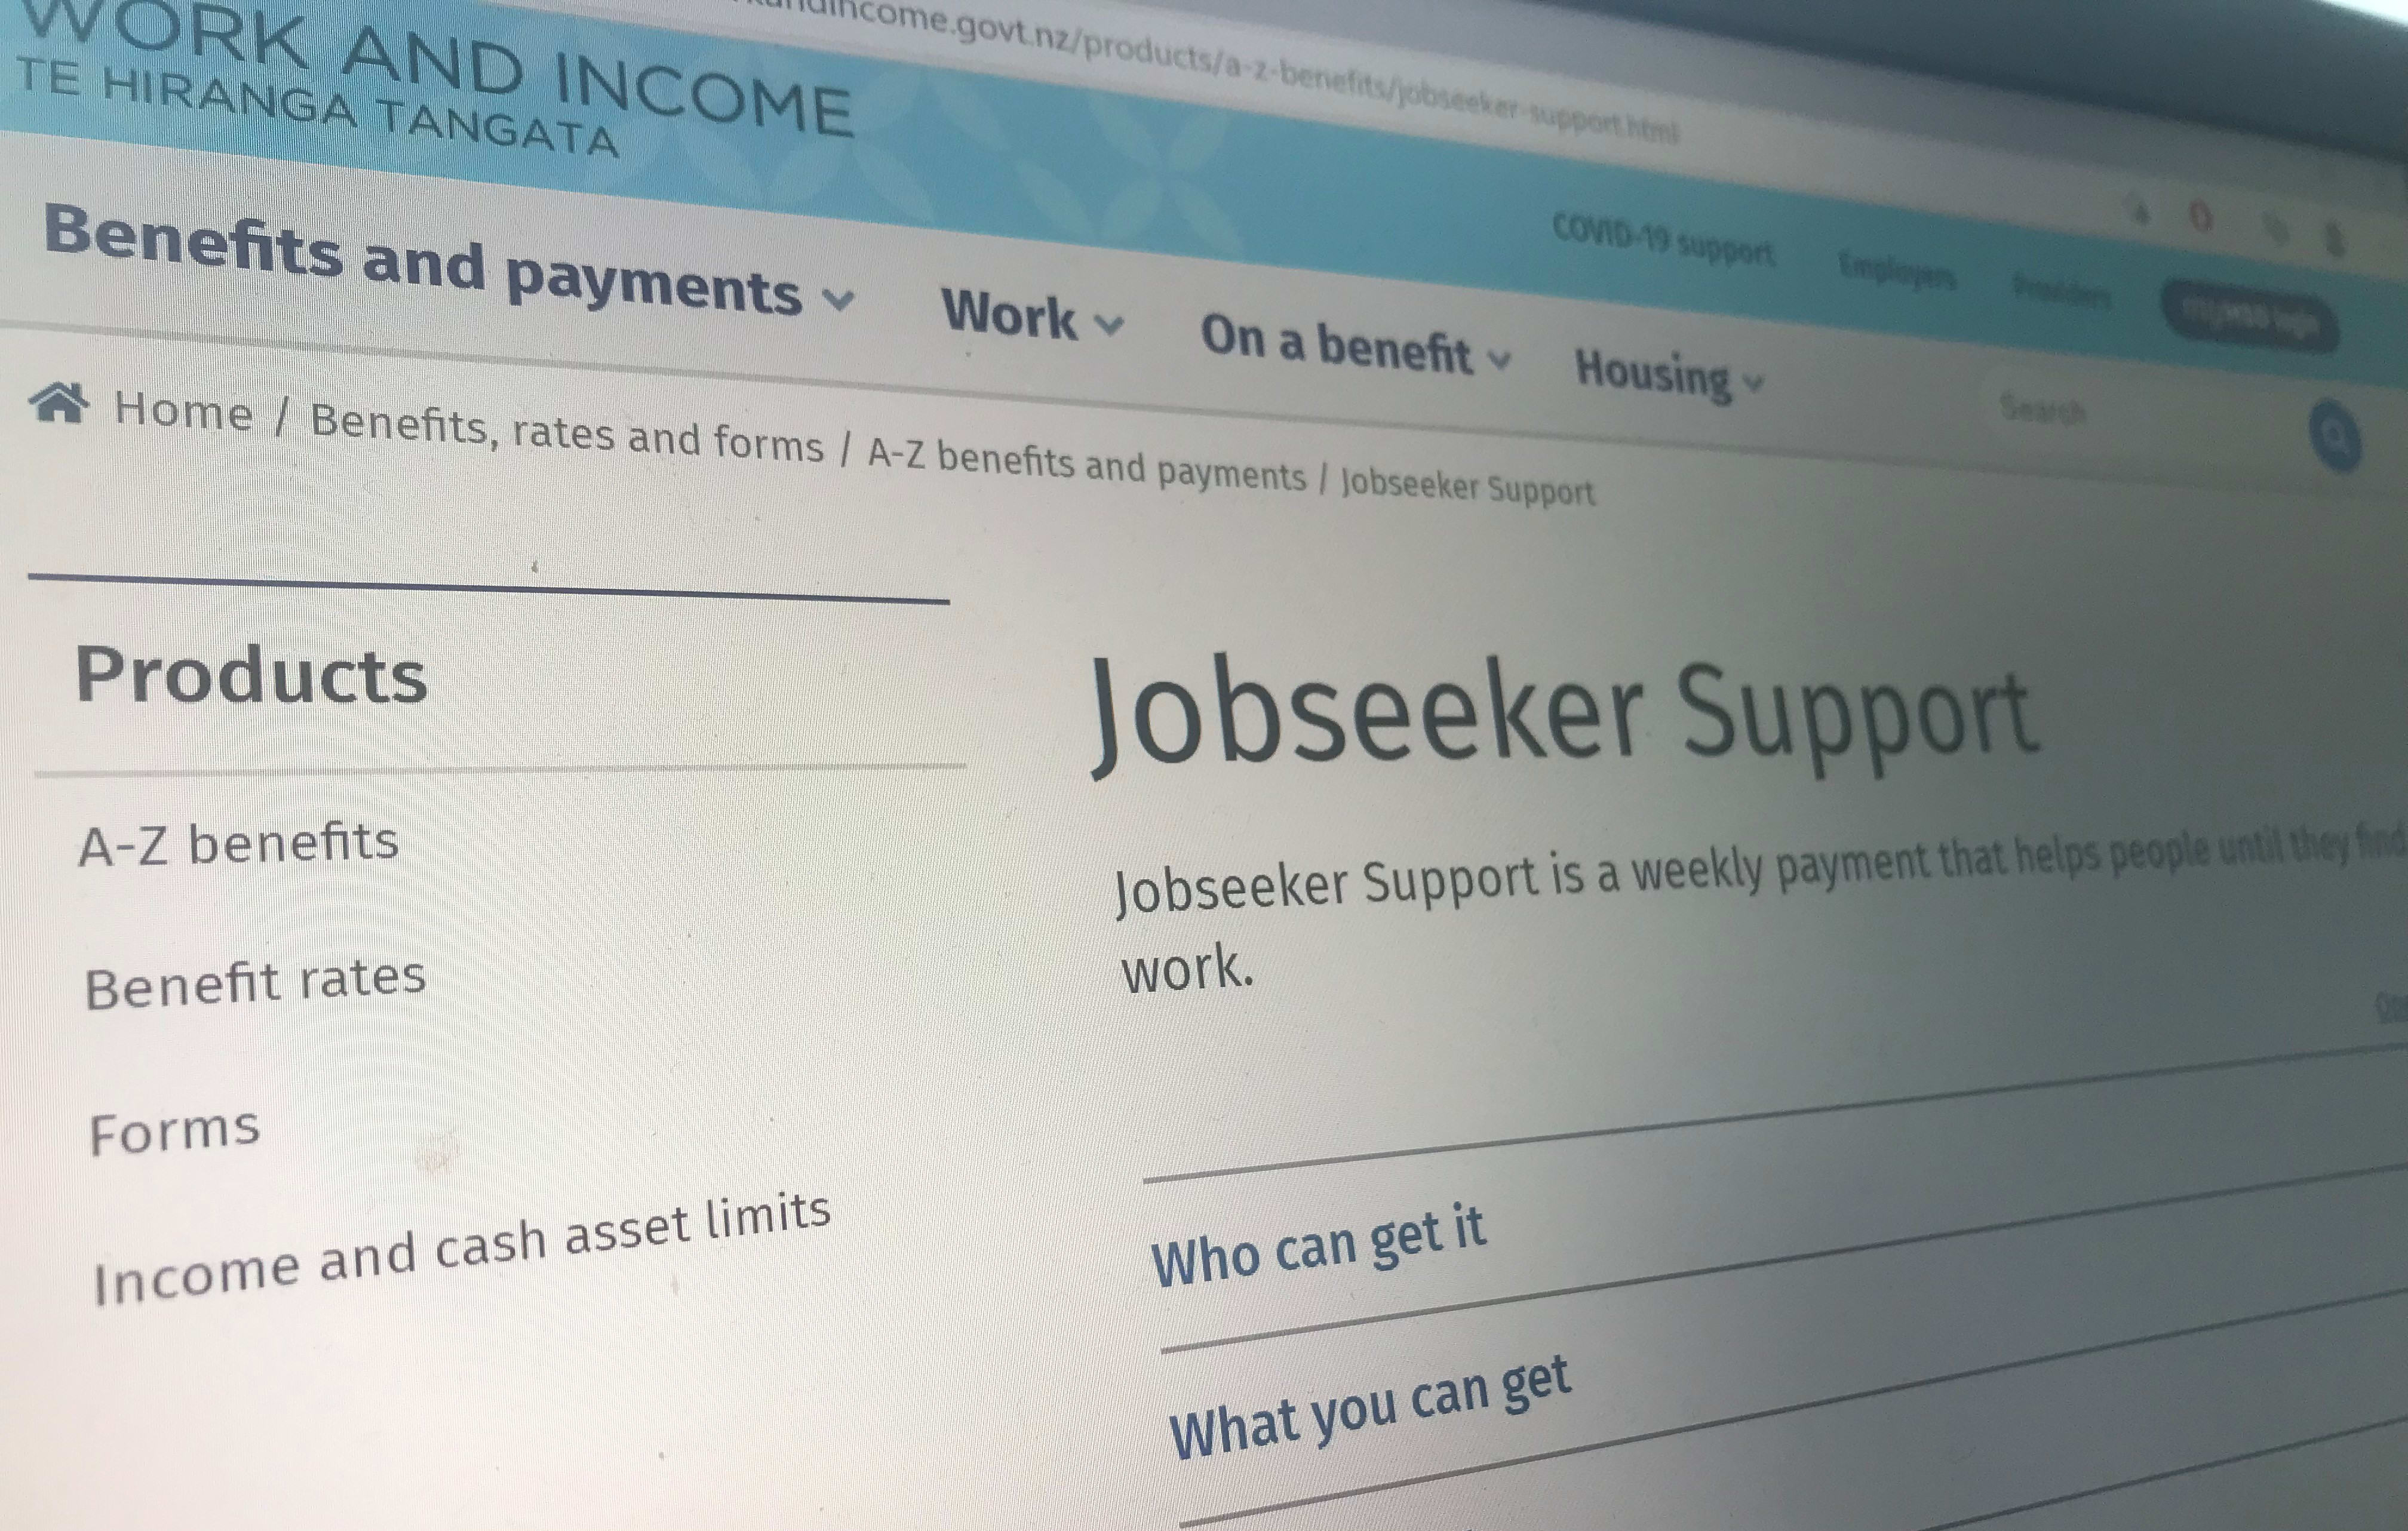 Jobseeker support. Benefit. Beneficiaries. Work and Income.